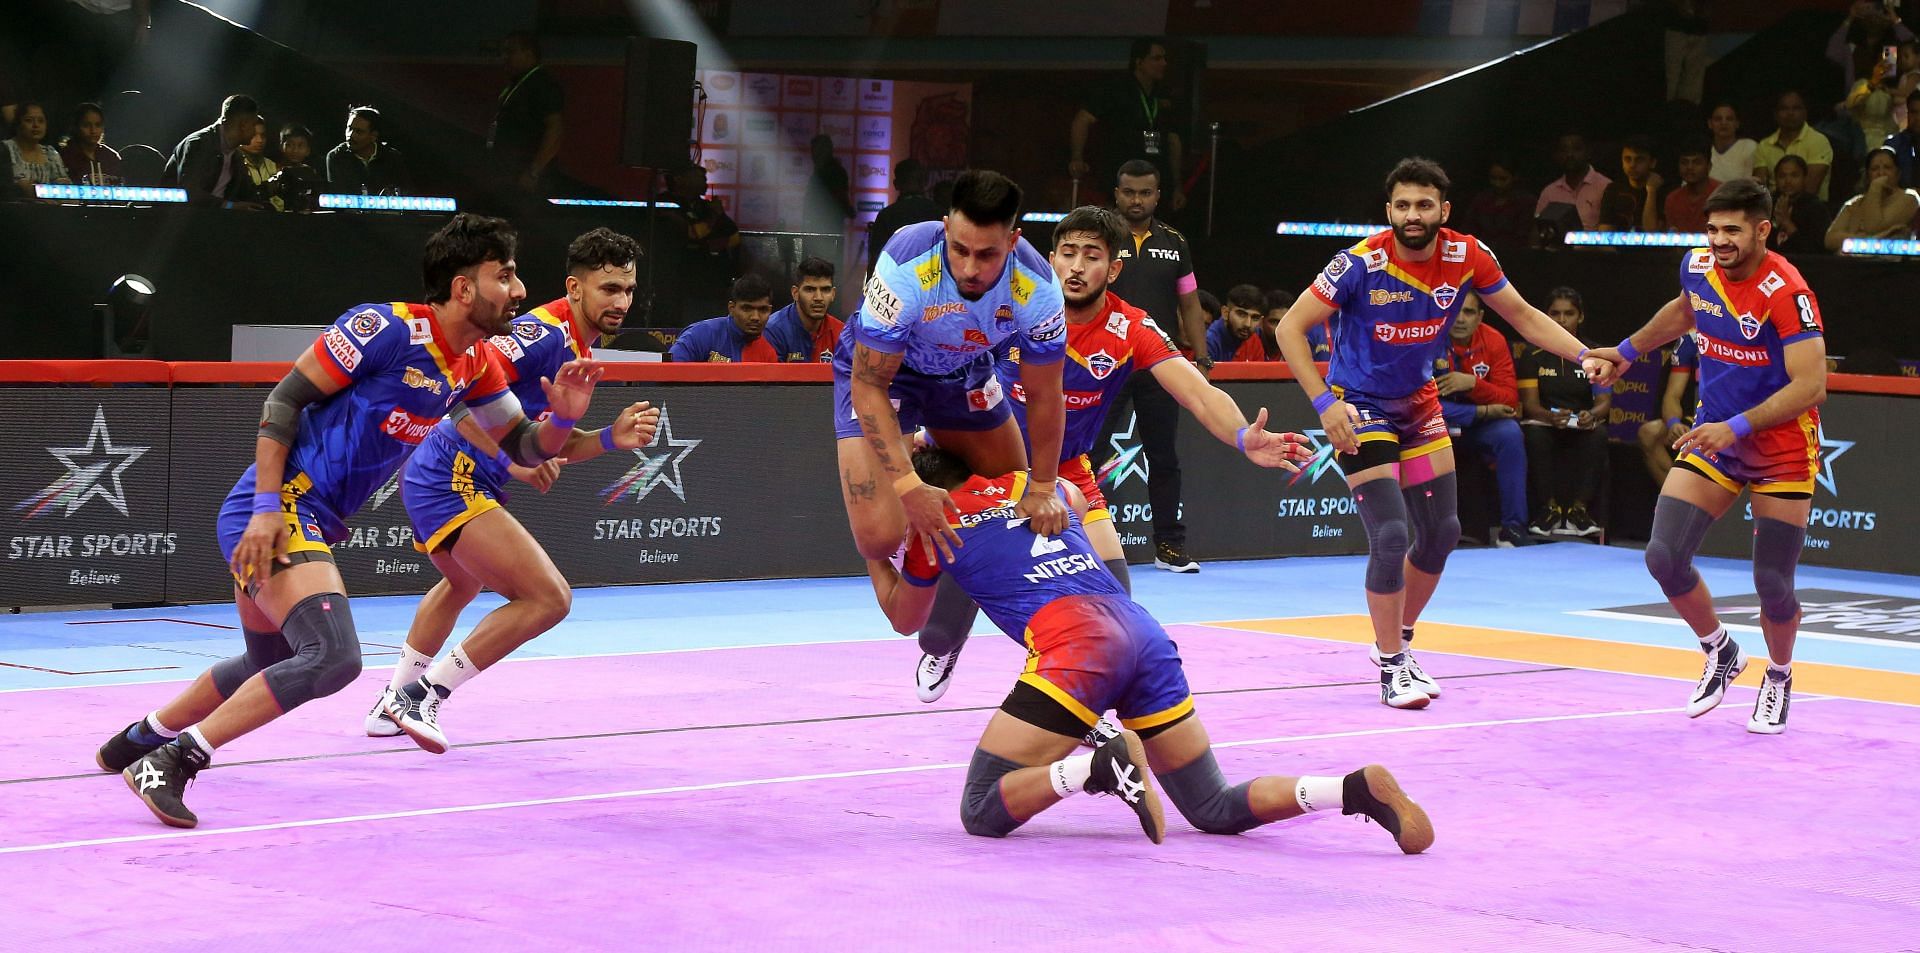 Can the UP Yoddhas beat the defending champions? (Credit: PKL)